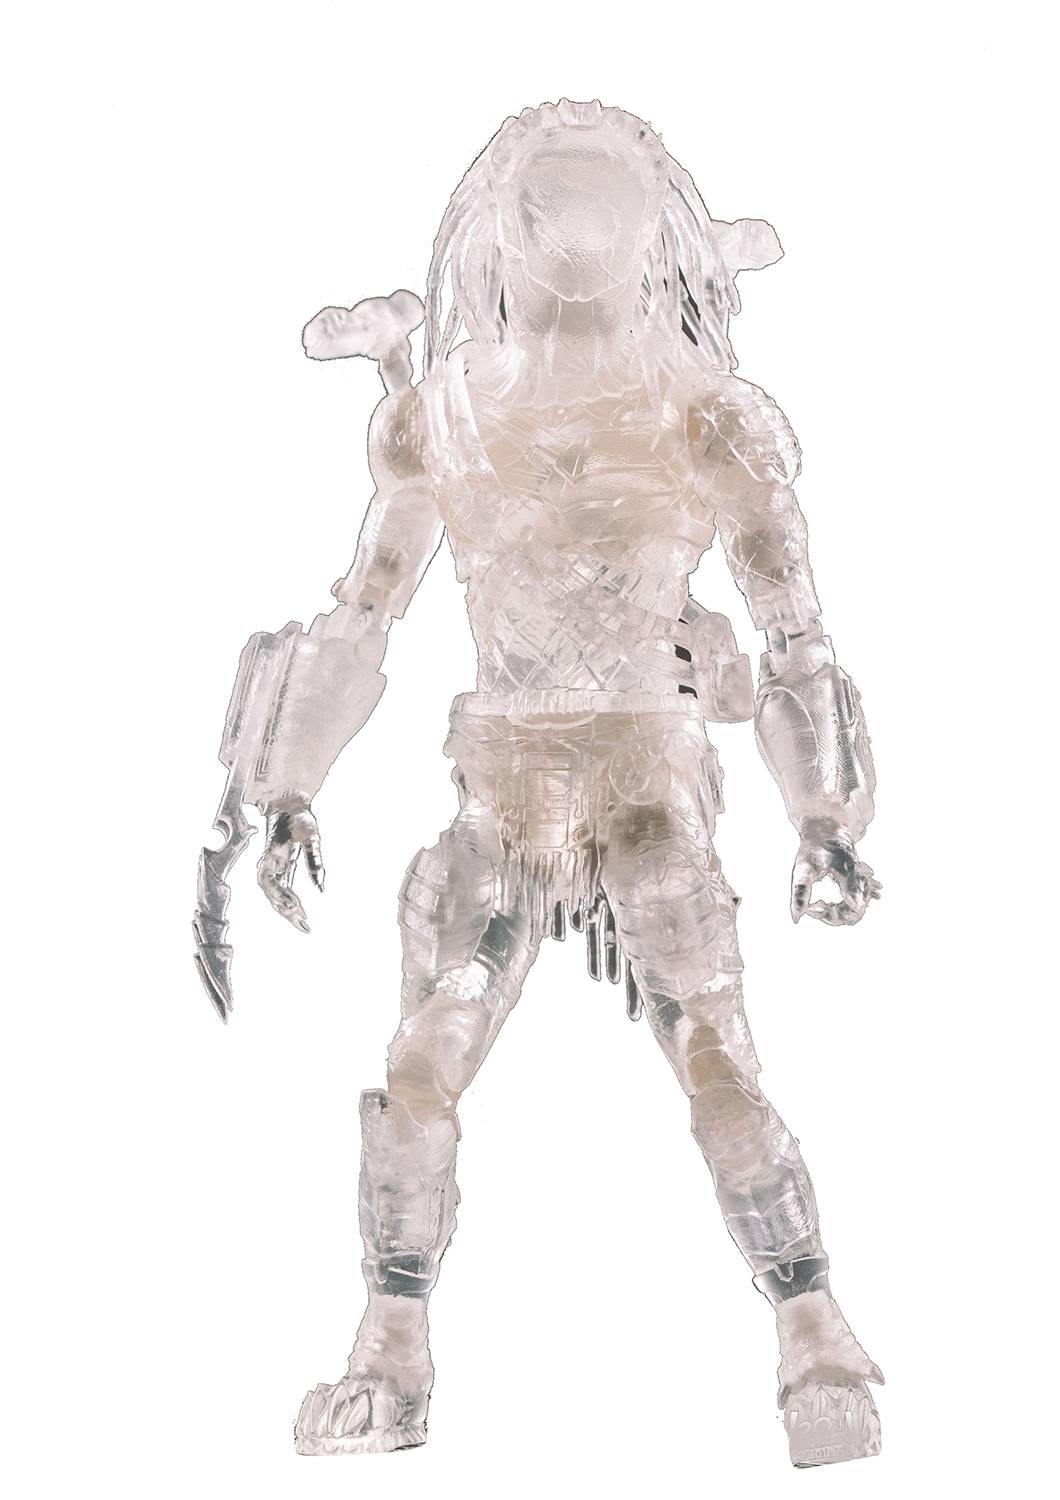 AVP 2 Invisible Wolf Predator 4 1/2 Inch Tall Action Figure